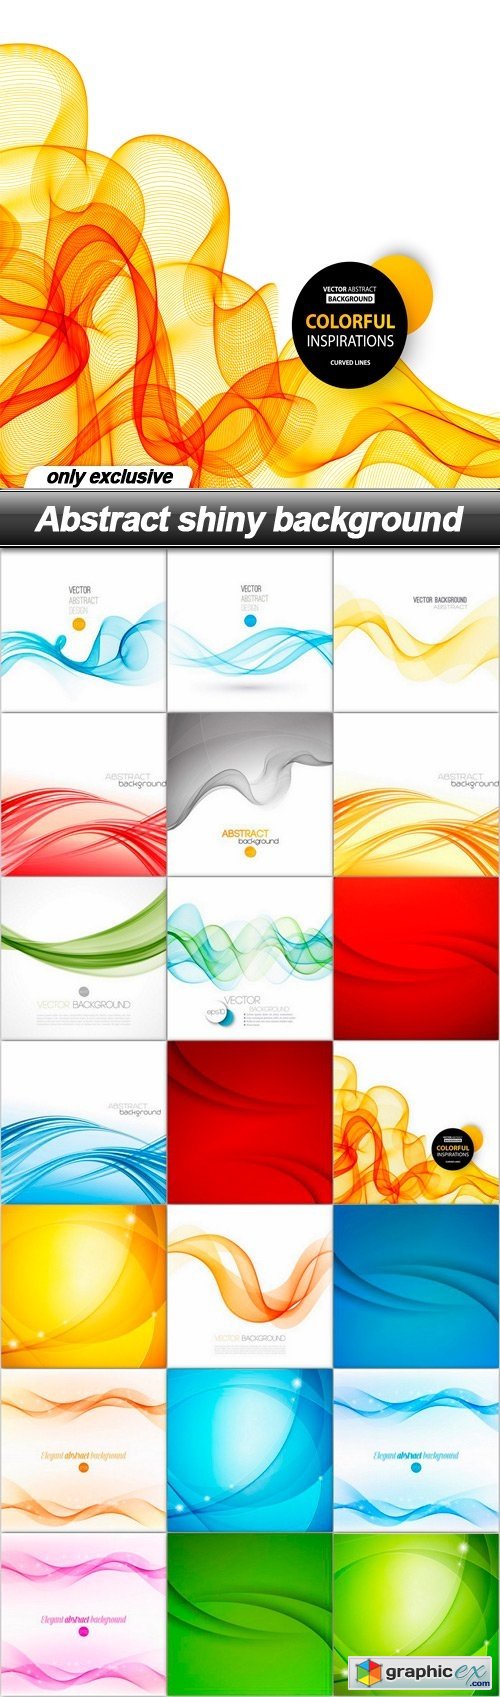 Abstract shiny background - 21 EPS